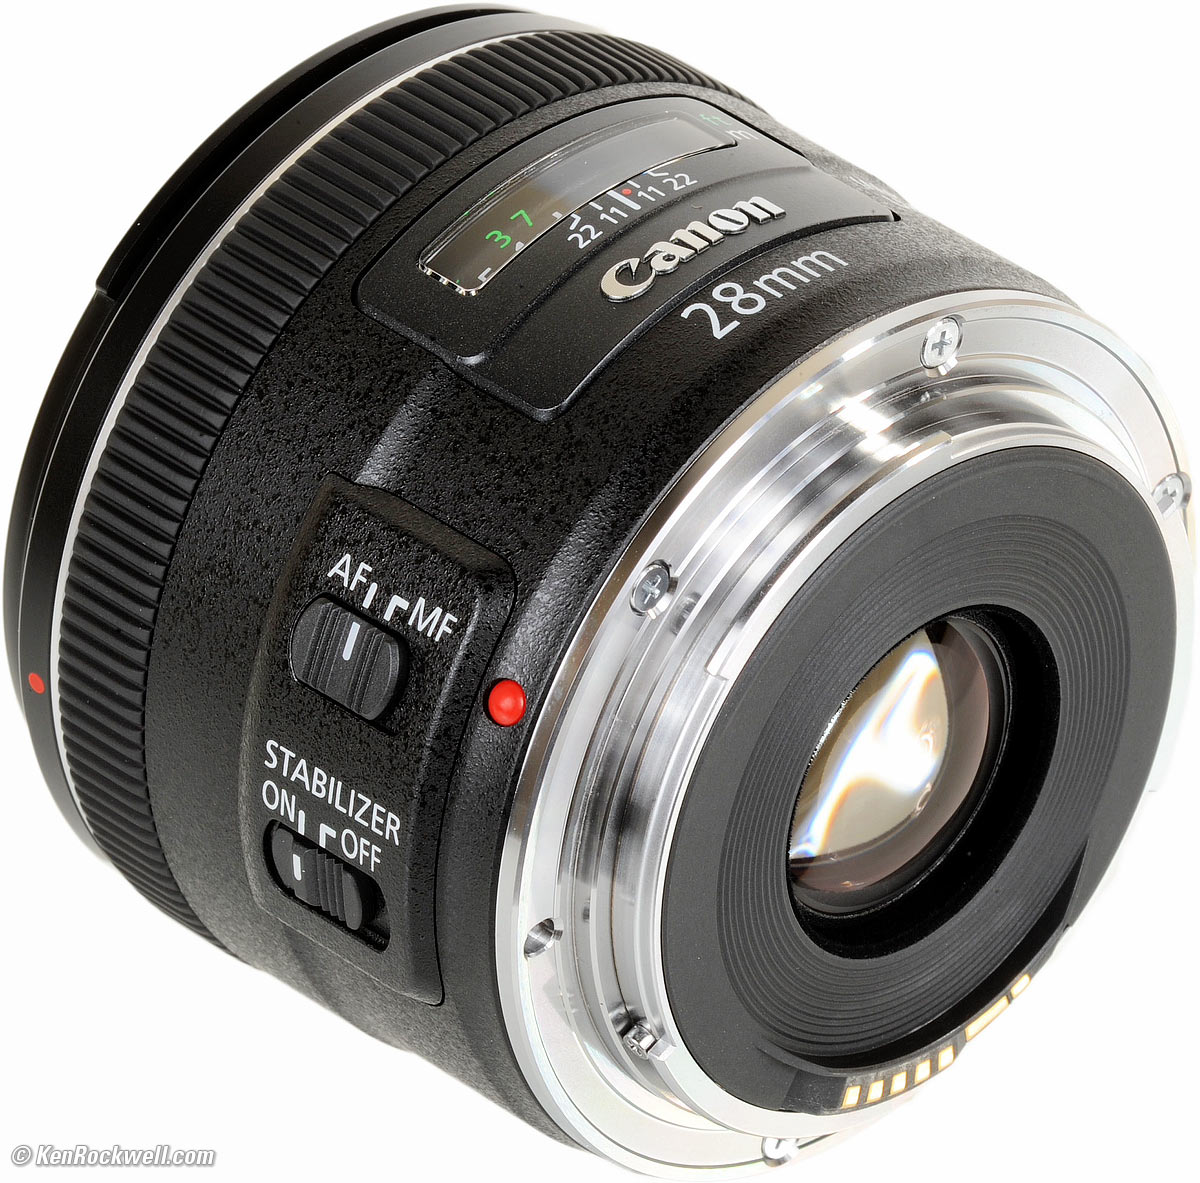 Canon 28mm f/2.8 IS Review